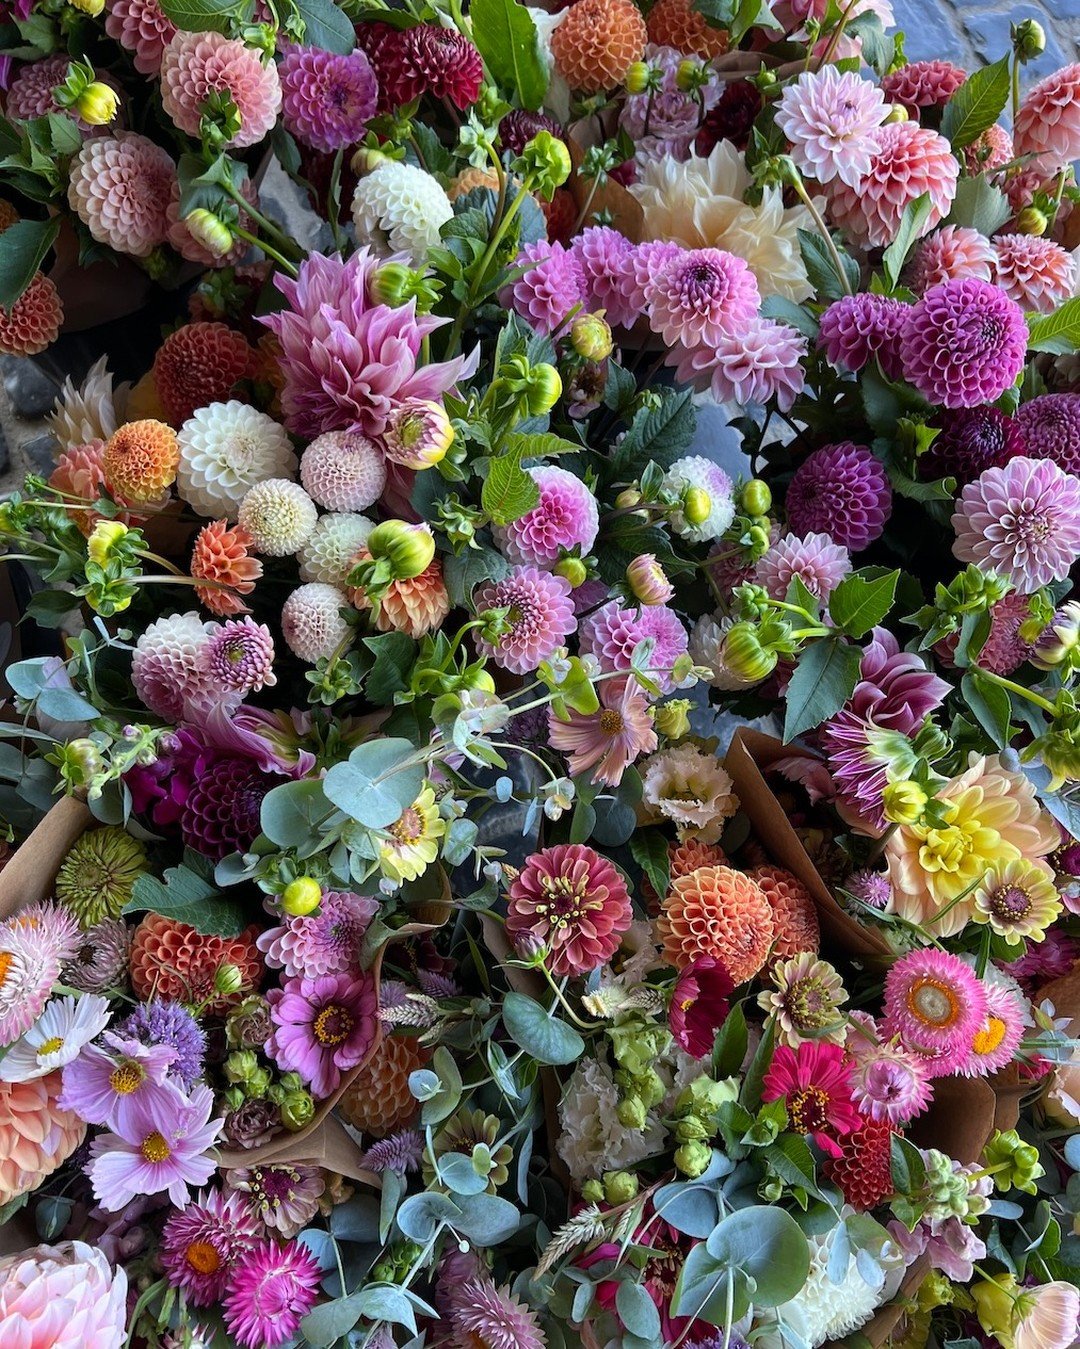 One of the greatest joys of spring is the reemergence of the colorful blooms we missed all winter. We could not be more excited to have @christinemcovino &amp; @wildirisflowertruck at the market, bringing a variety of cut flowers and tubers 🌷 

Whet